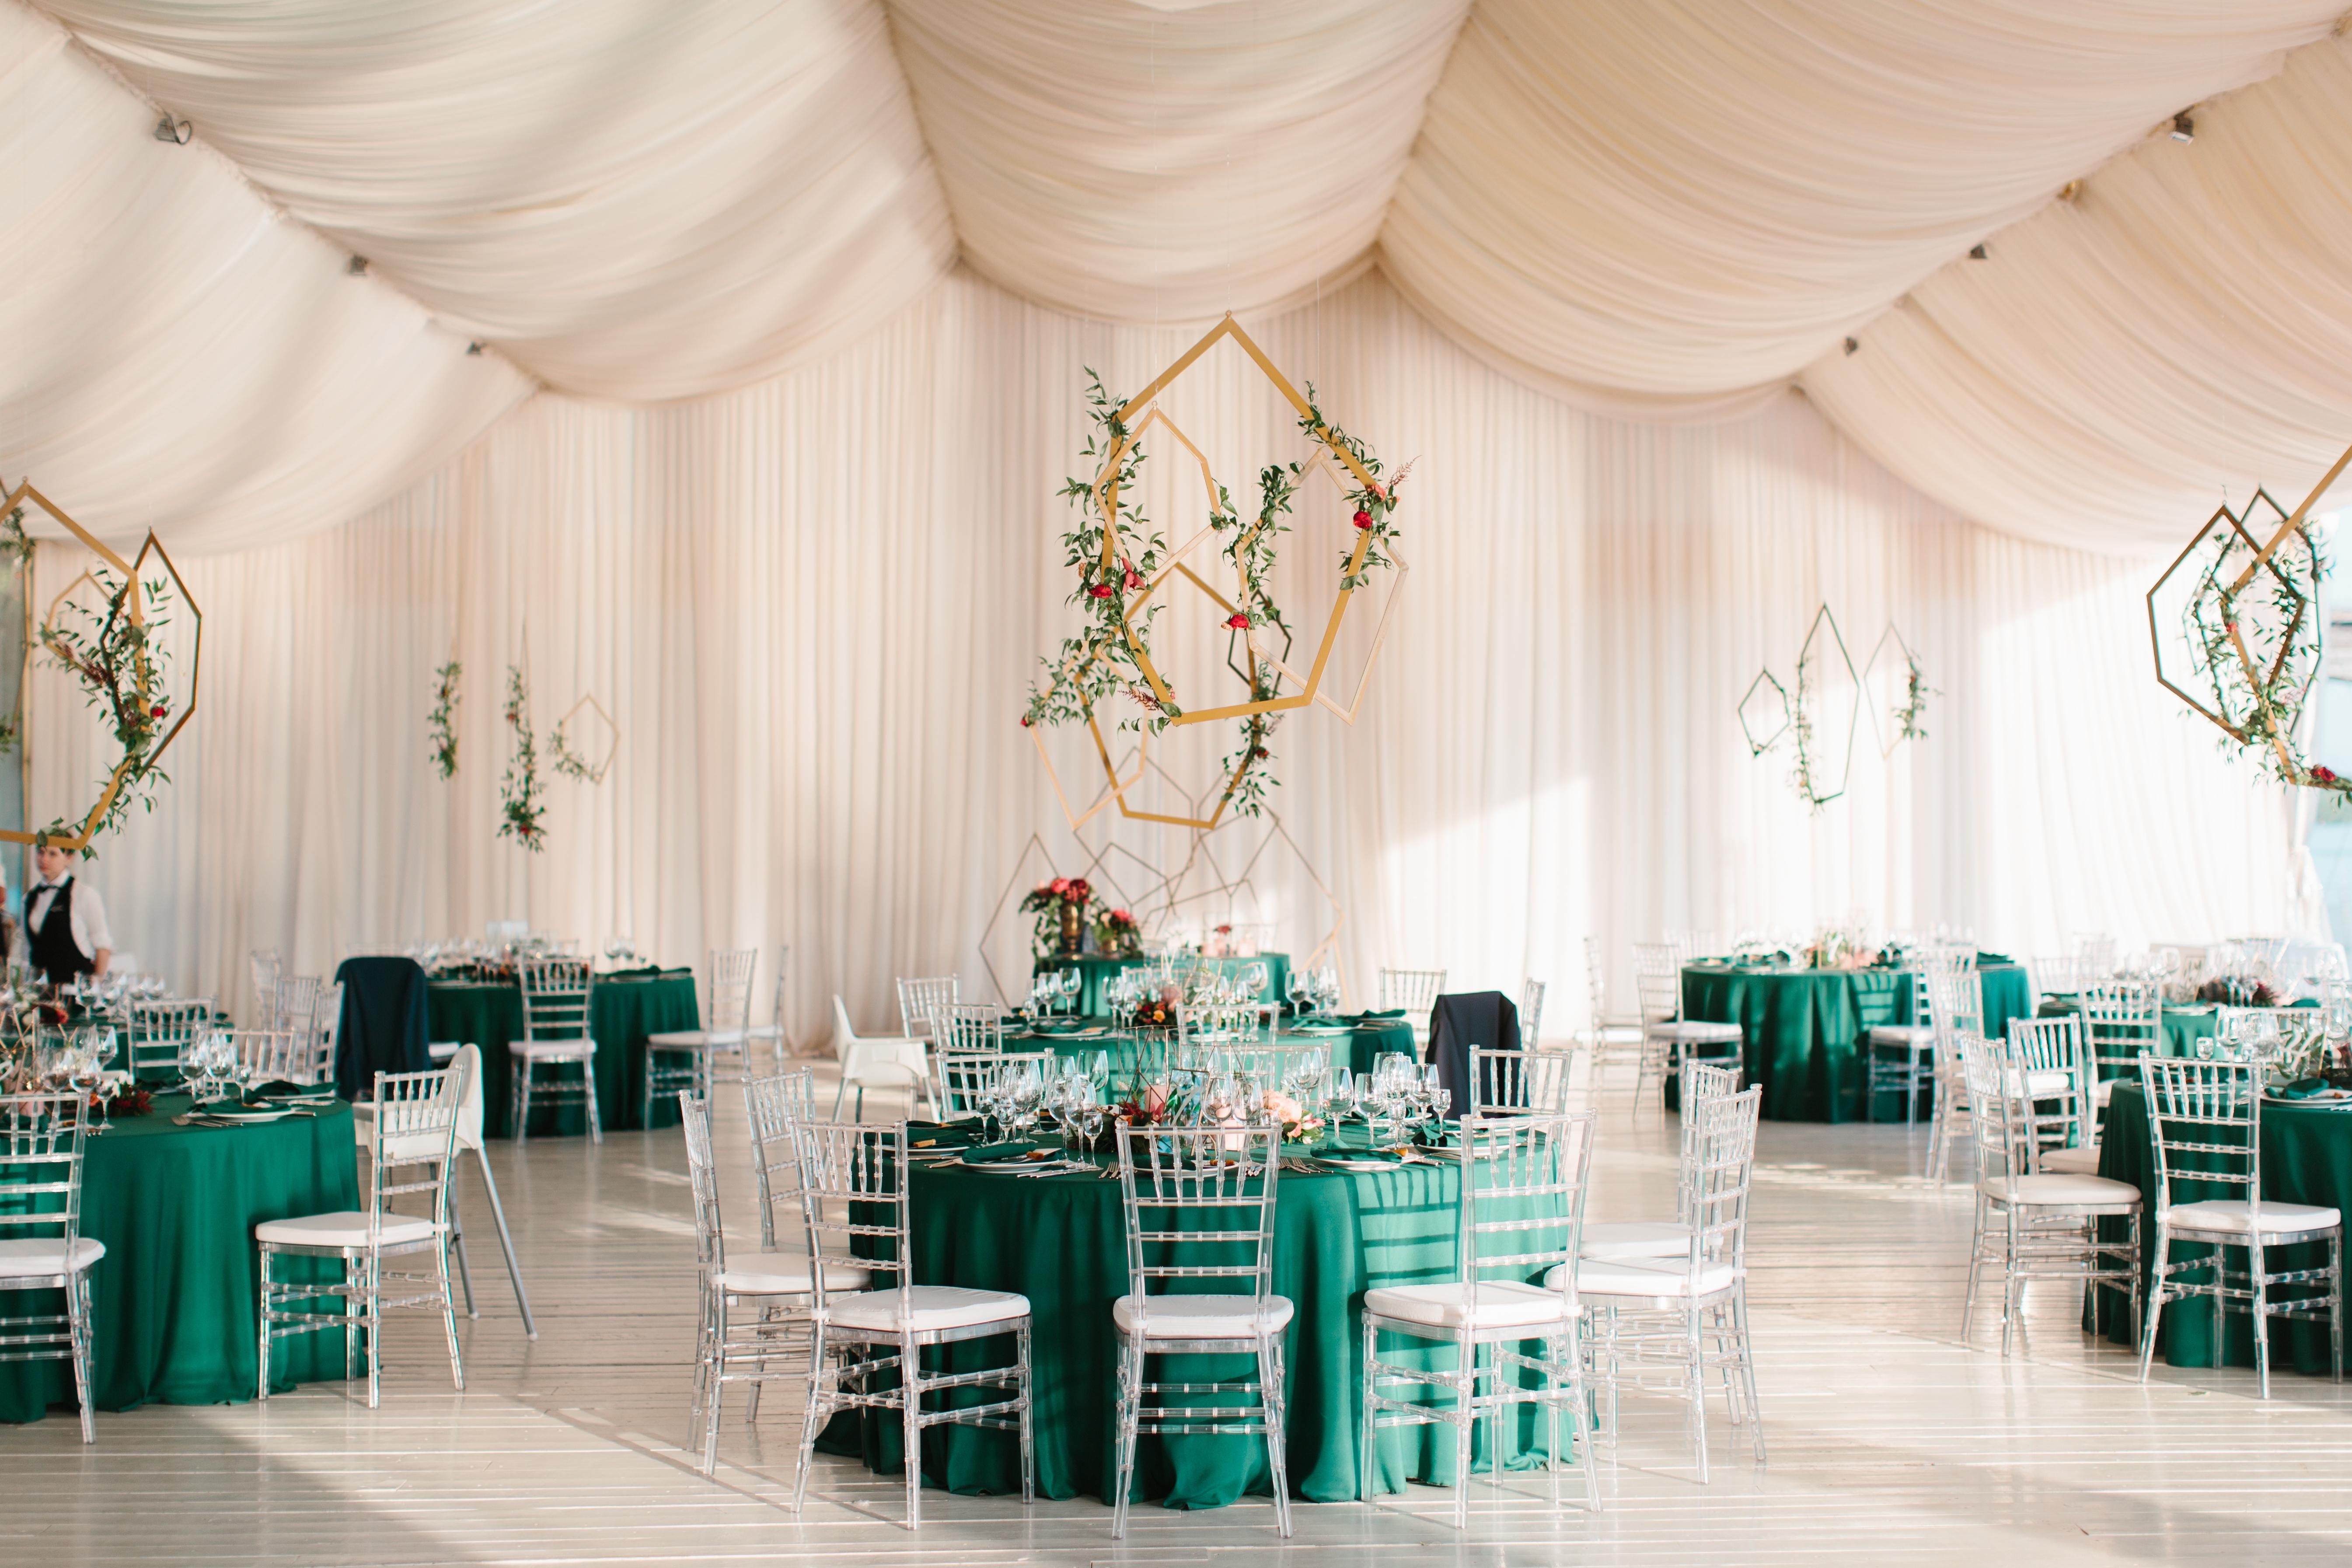 The decor of the wedding | Source: Shutterstock